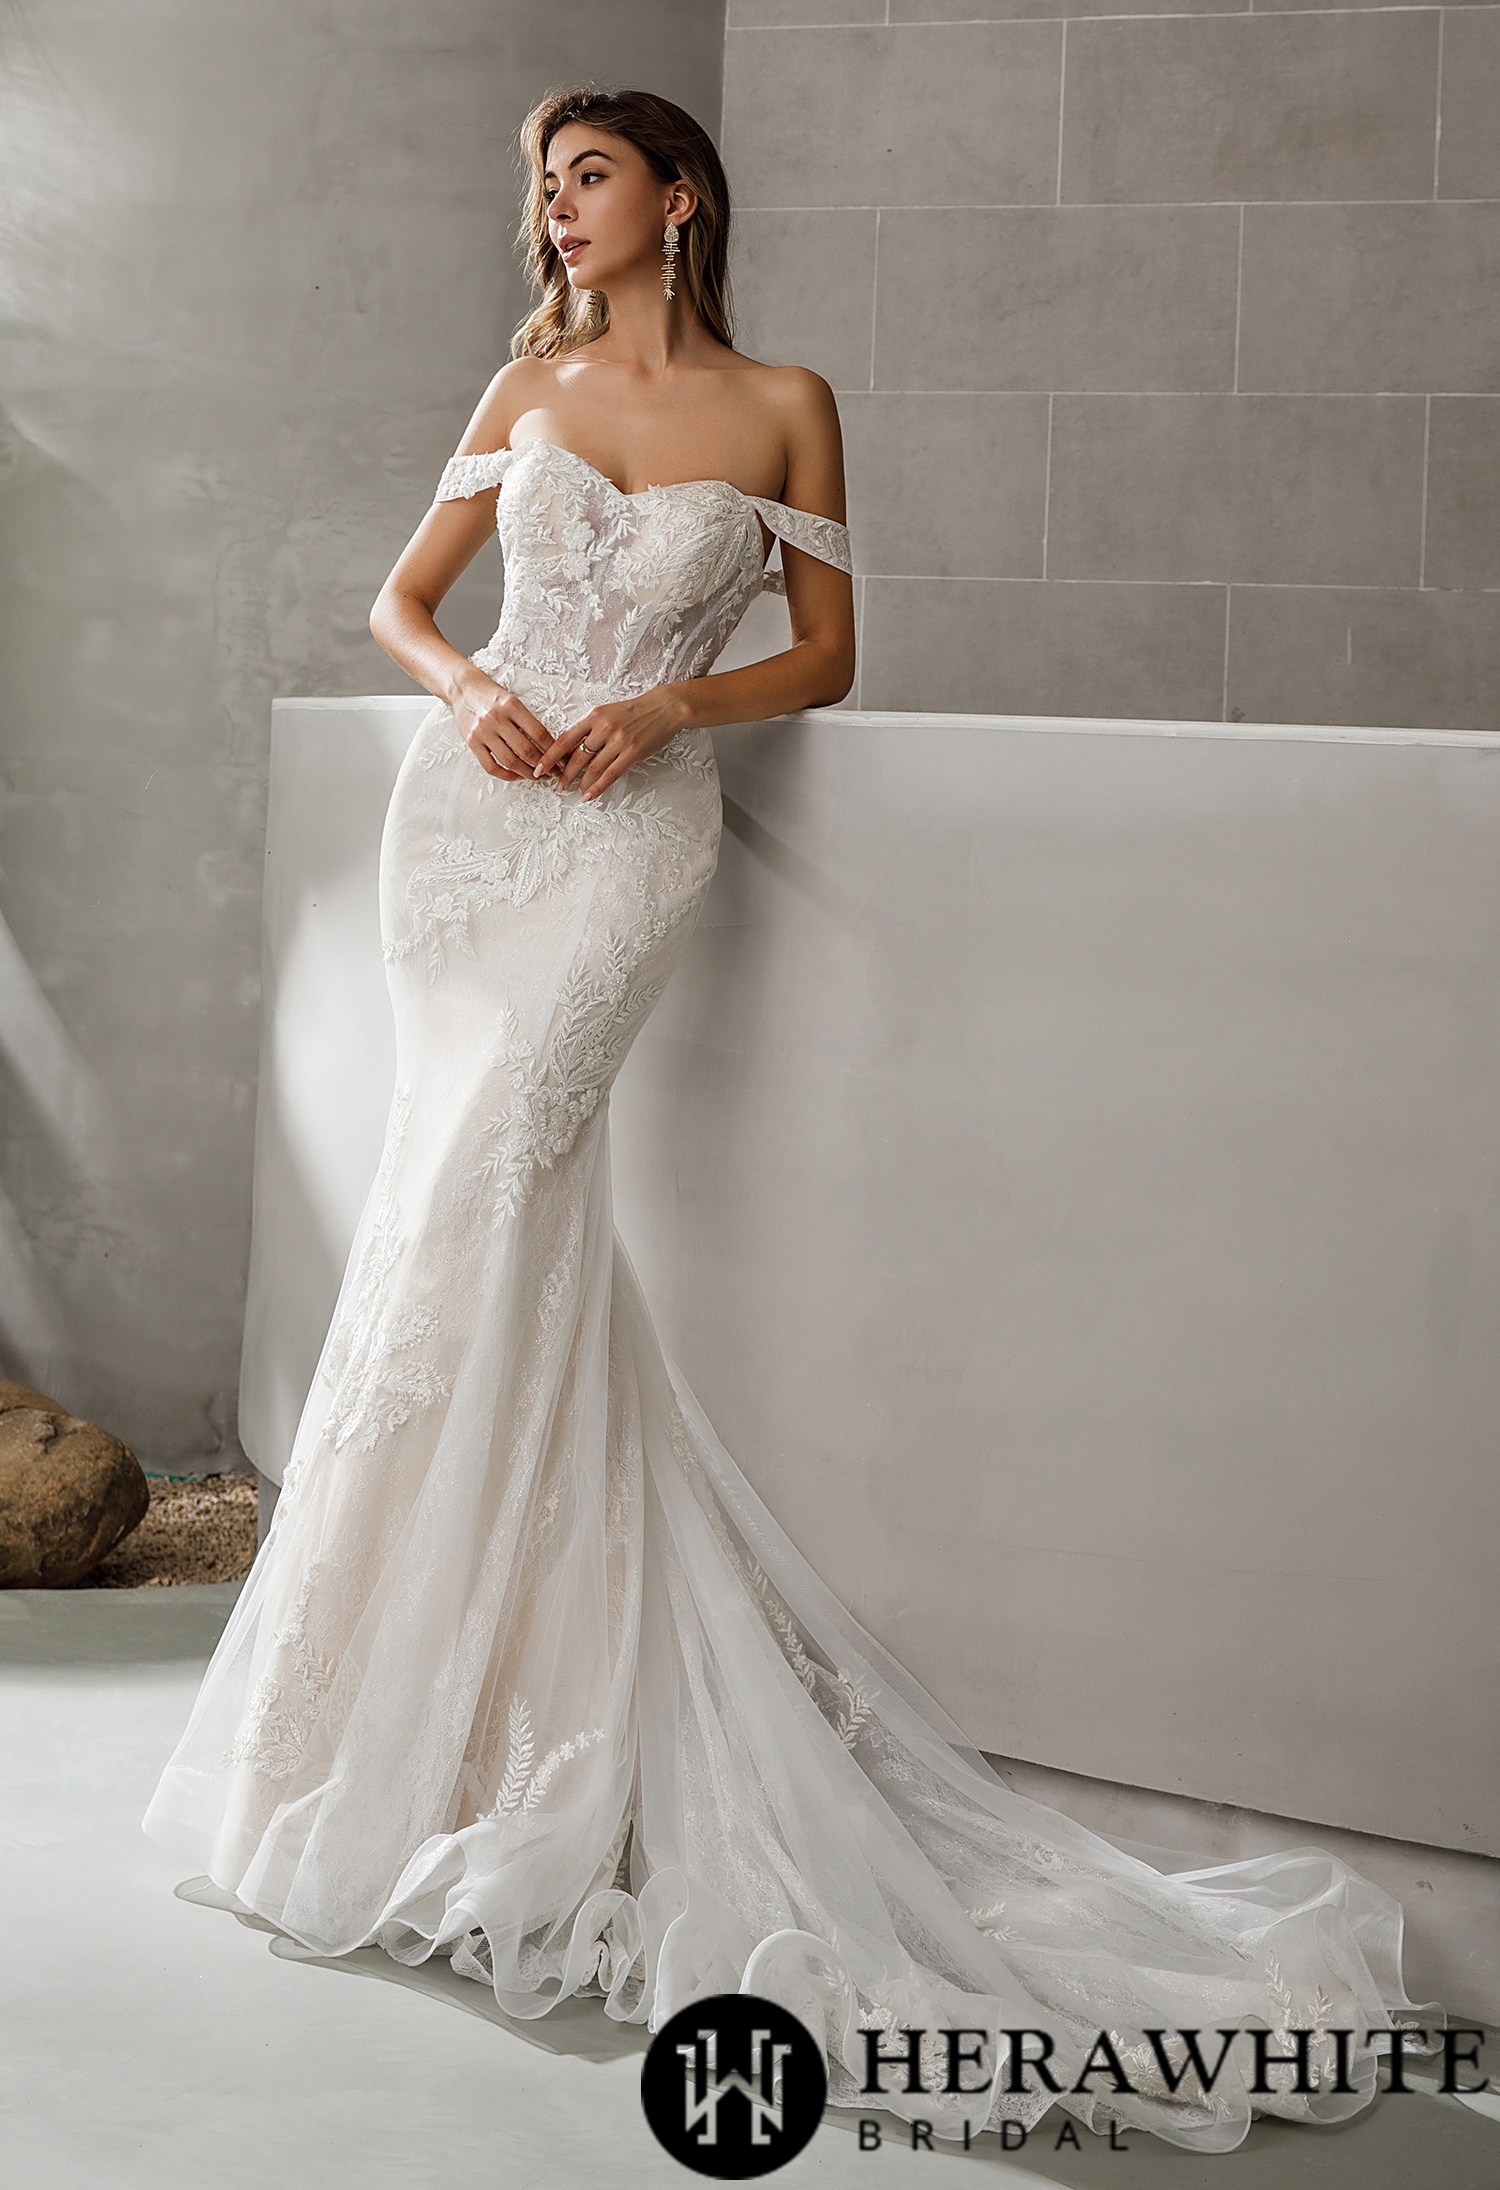 In Stock/ Romantic Sweetheart Neckline Bridal Gown With Illusion Bodice